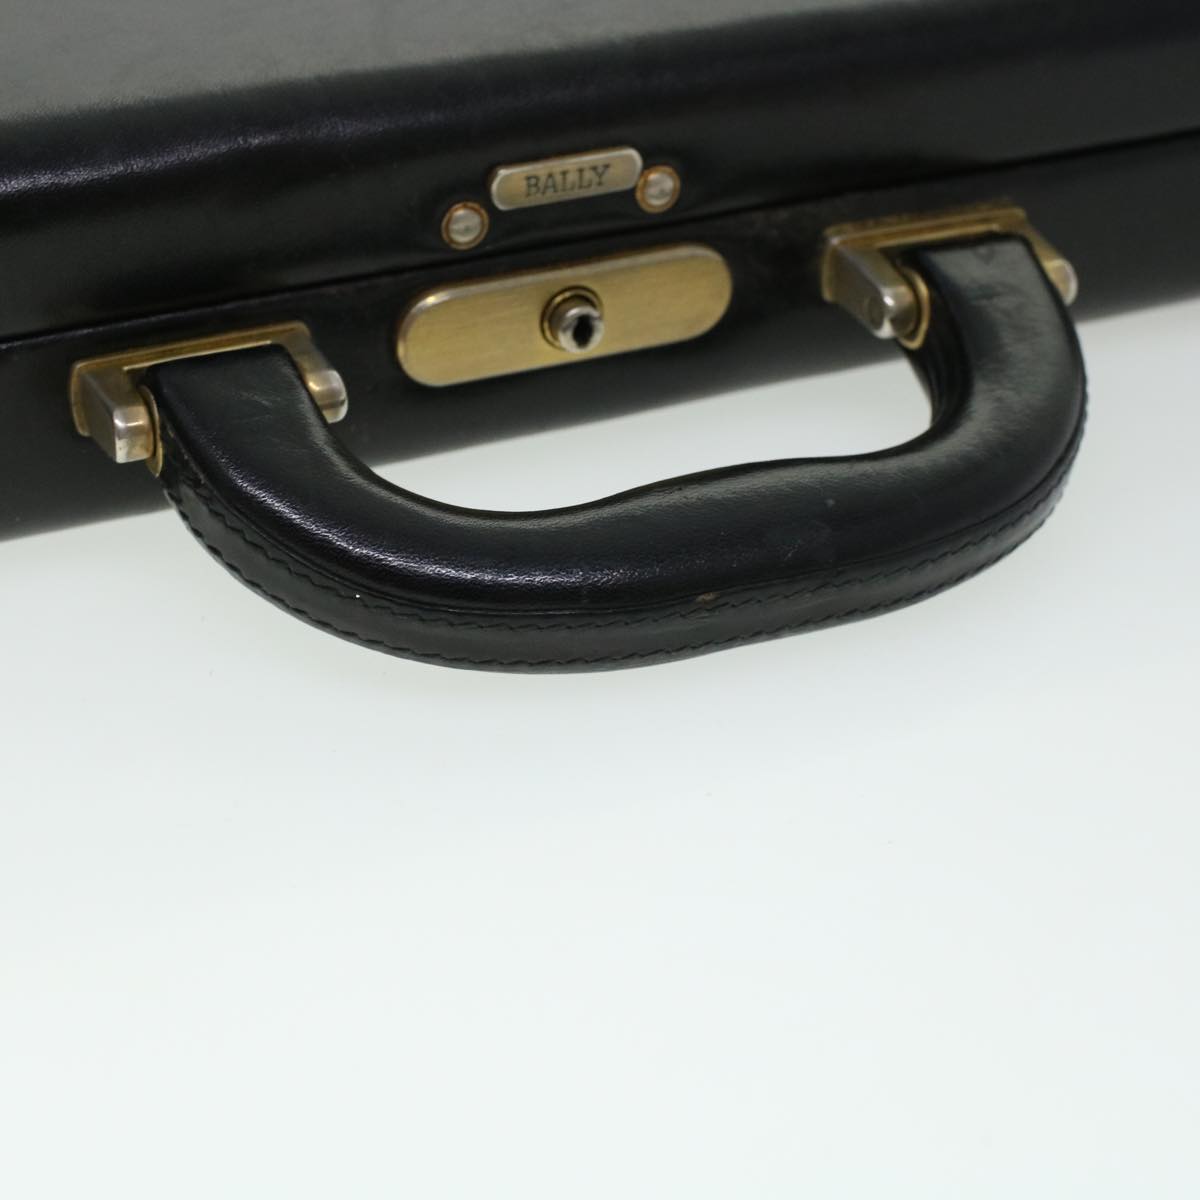 BALLY Business Bag Leather Black Auth bs5470